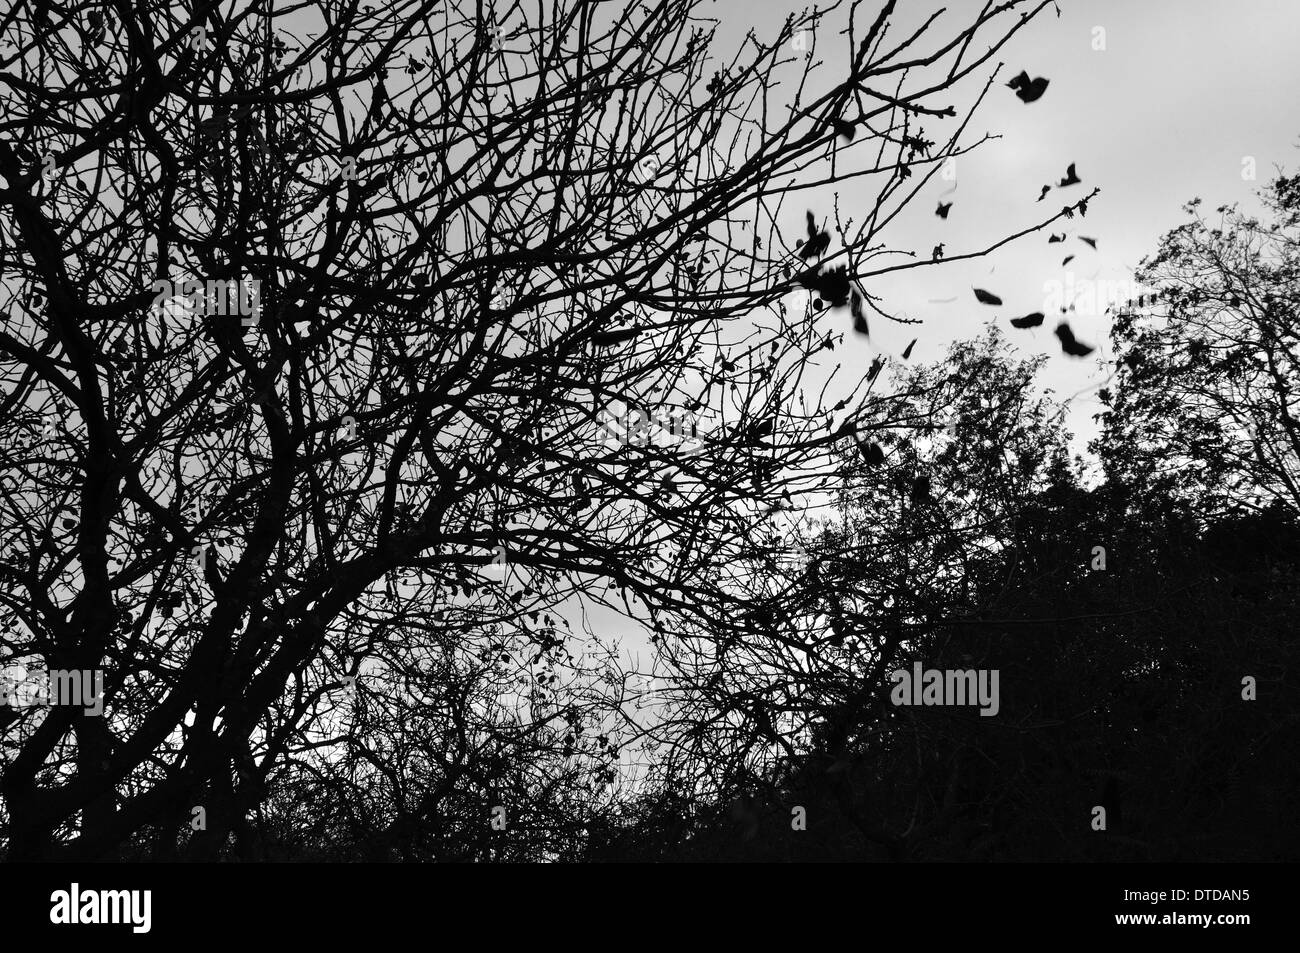 Forest trees silhouette and falling leaves autumn landscape. Black and white. Stock Photo